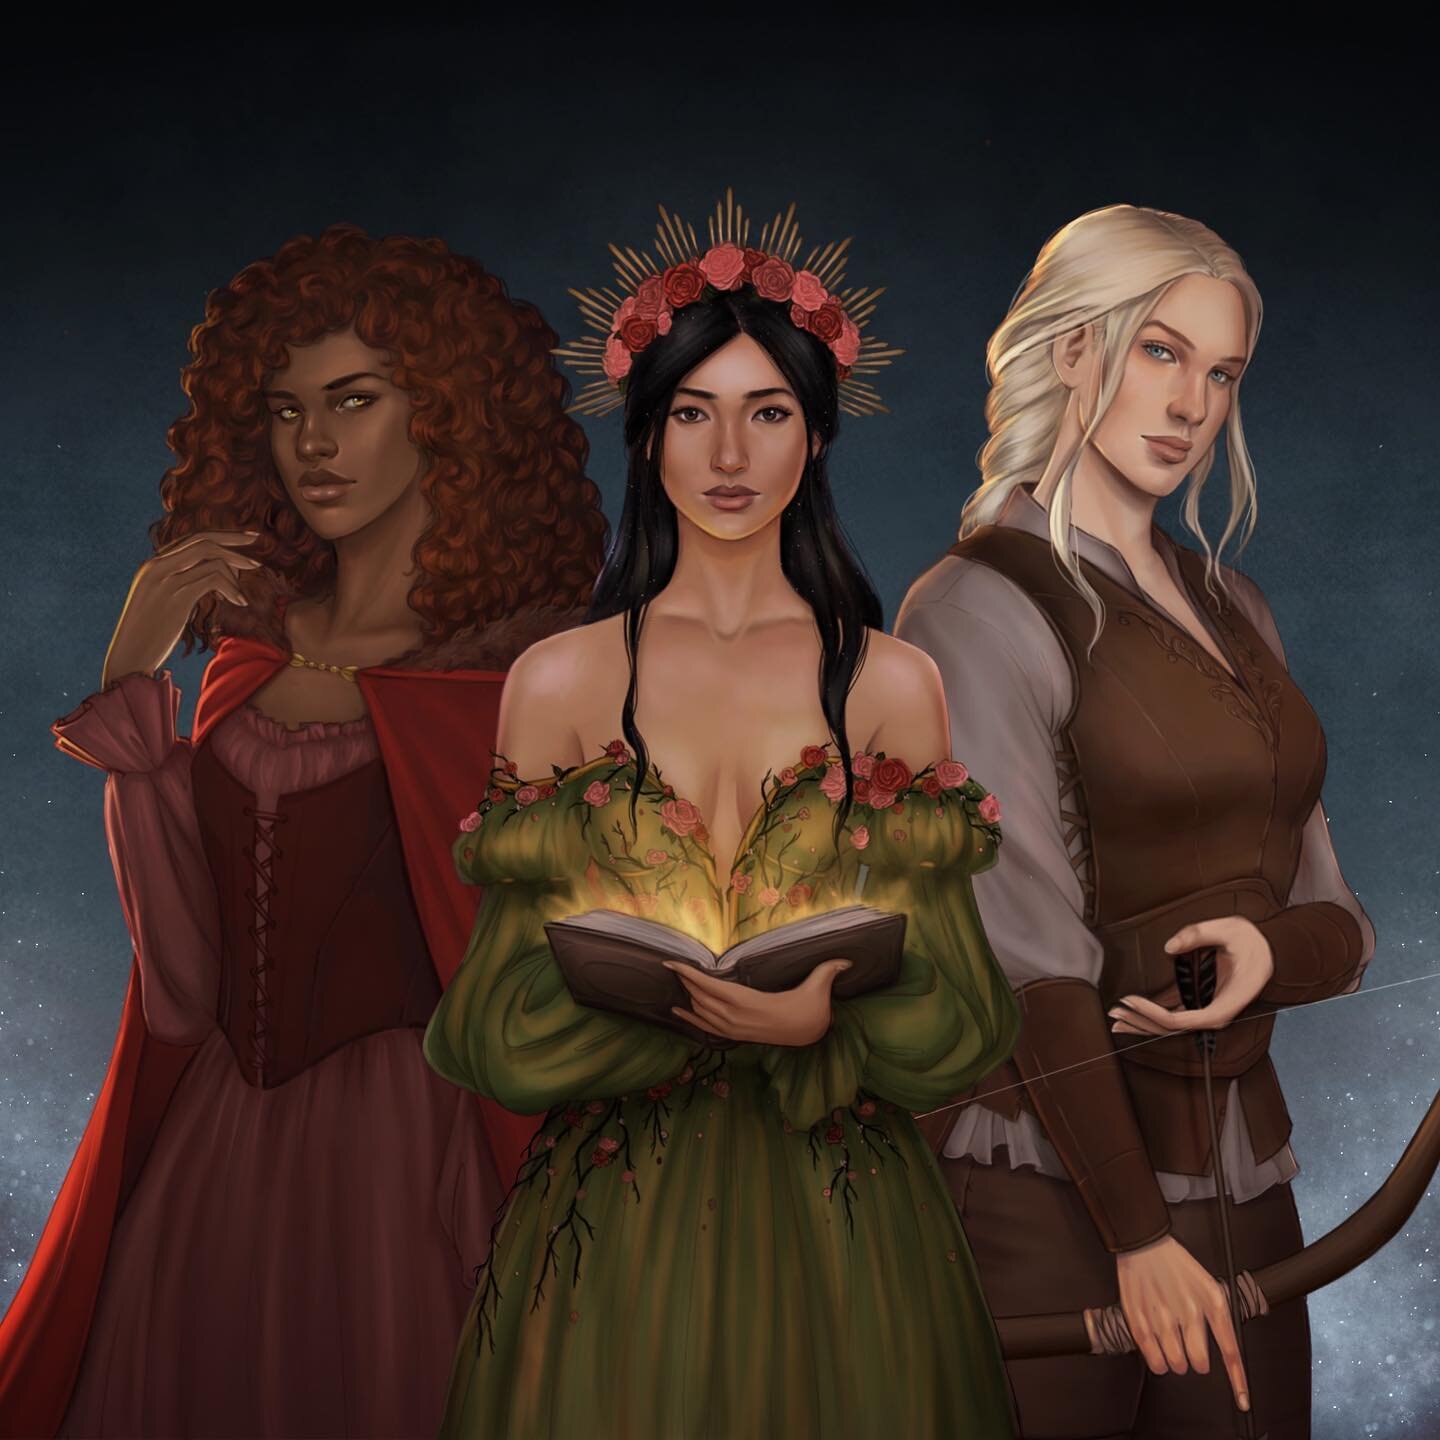 Had the absolute pleasure of drawing these LOVELY ladies&mdash;Talia, Sorrell, and Calla&mdash;for @rosaredss from her apipit pitch! (also yay for fairytale retellings!) &hearts;️
It was so fun being able to paint out these characters and can&rsquo;t